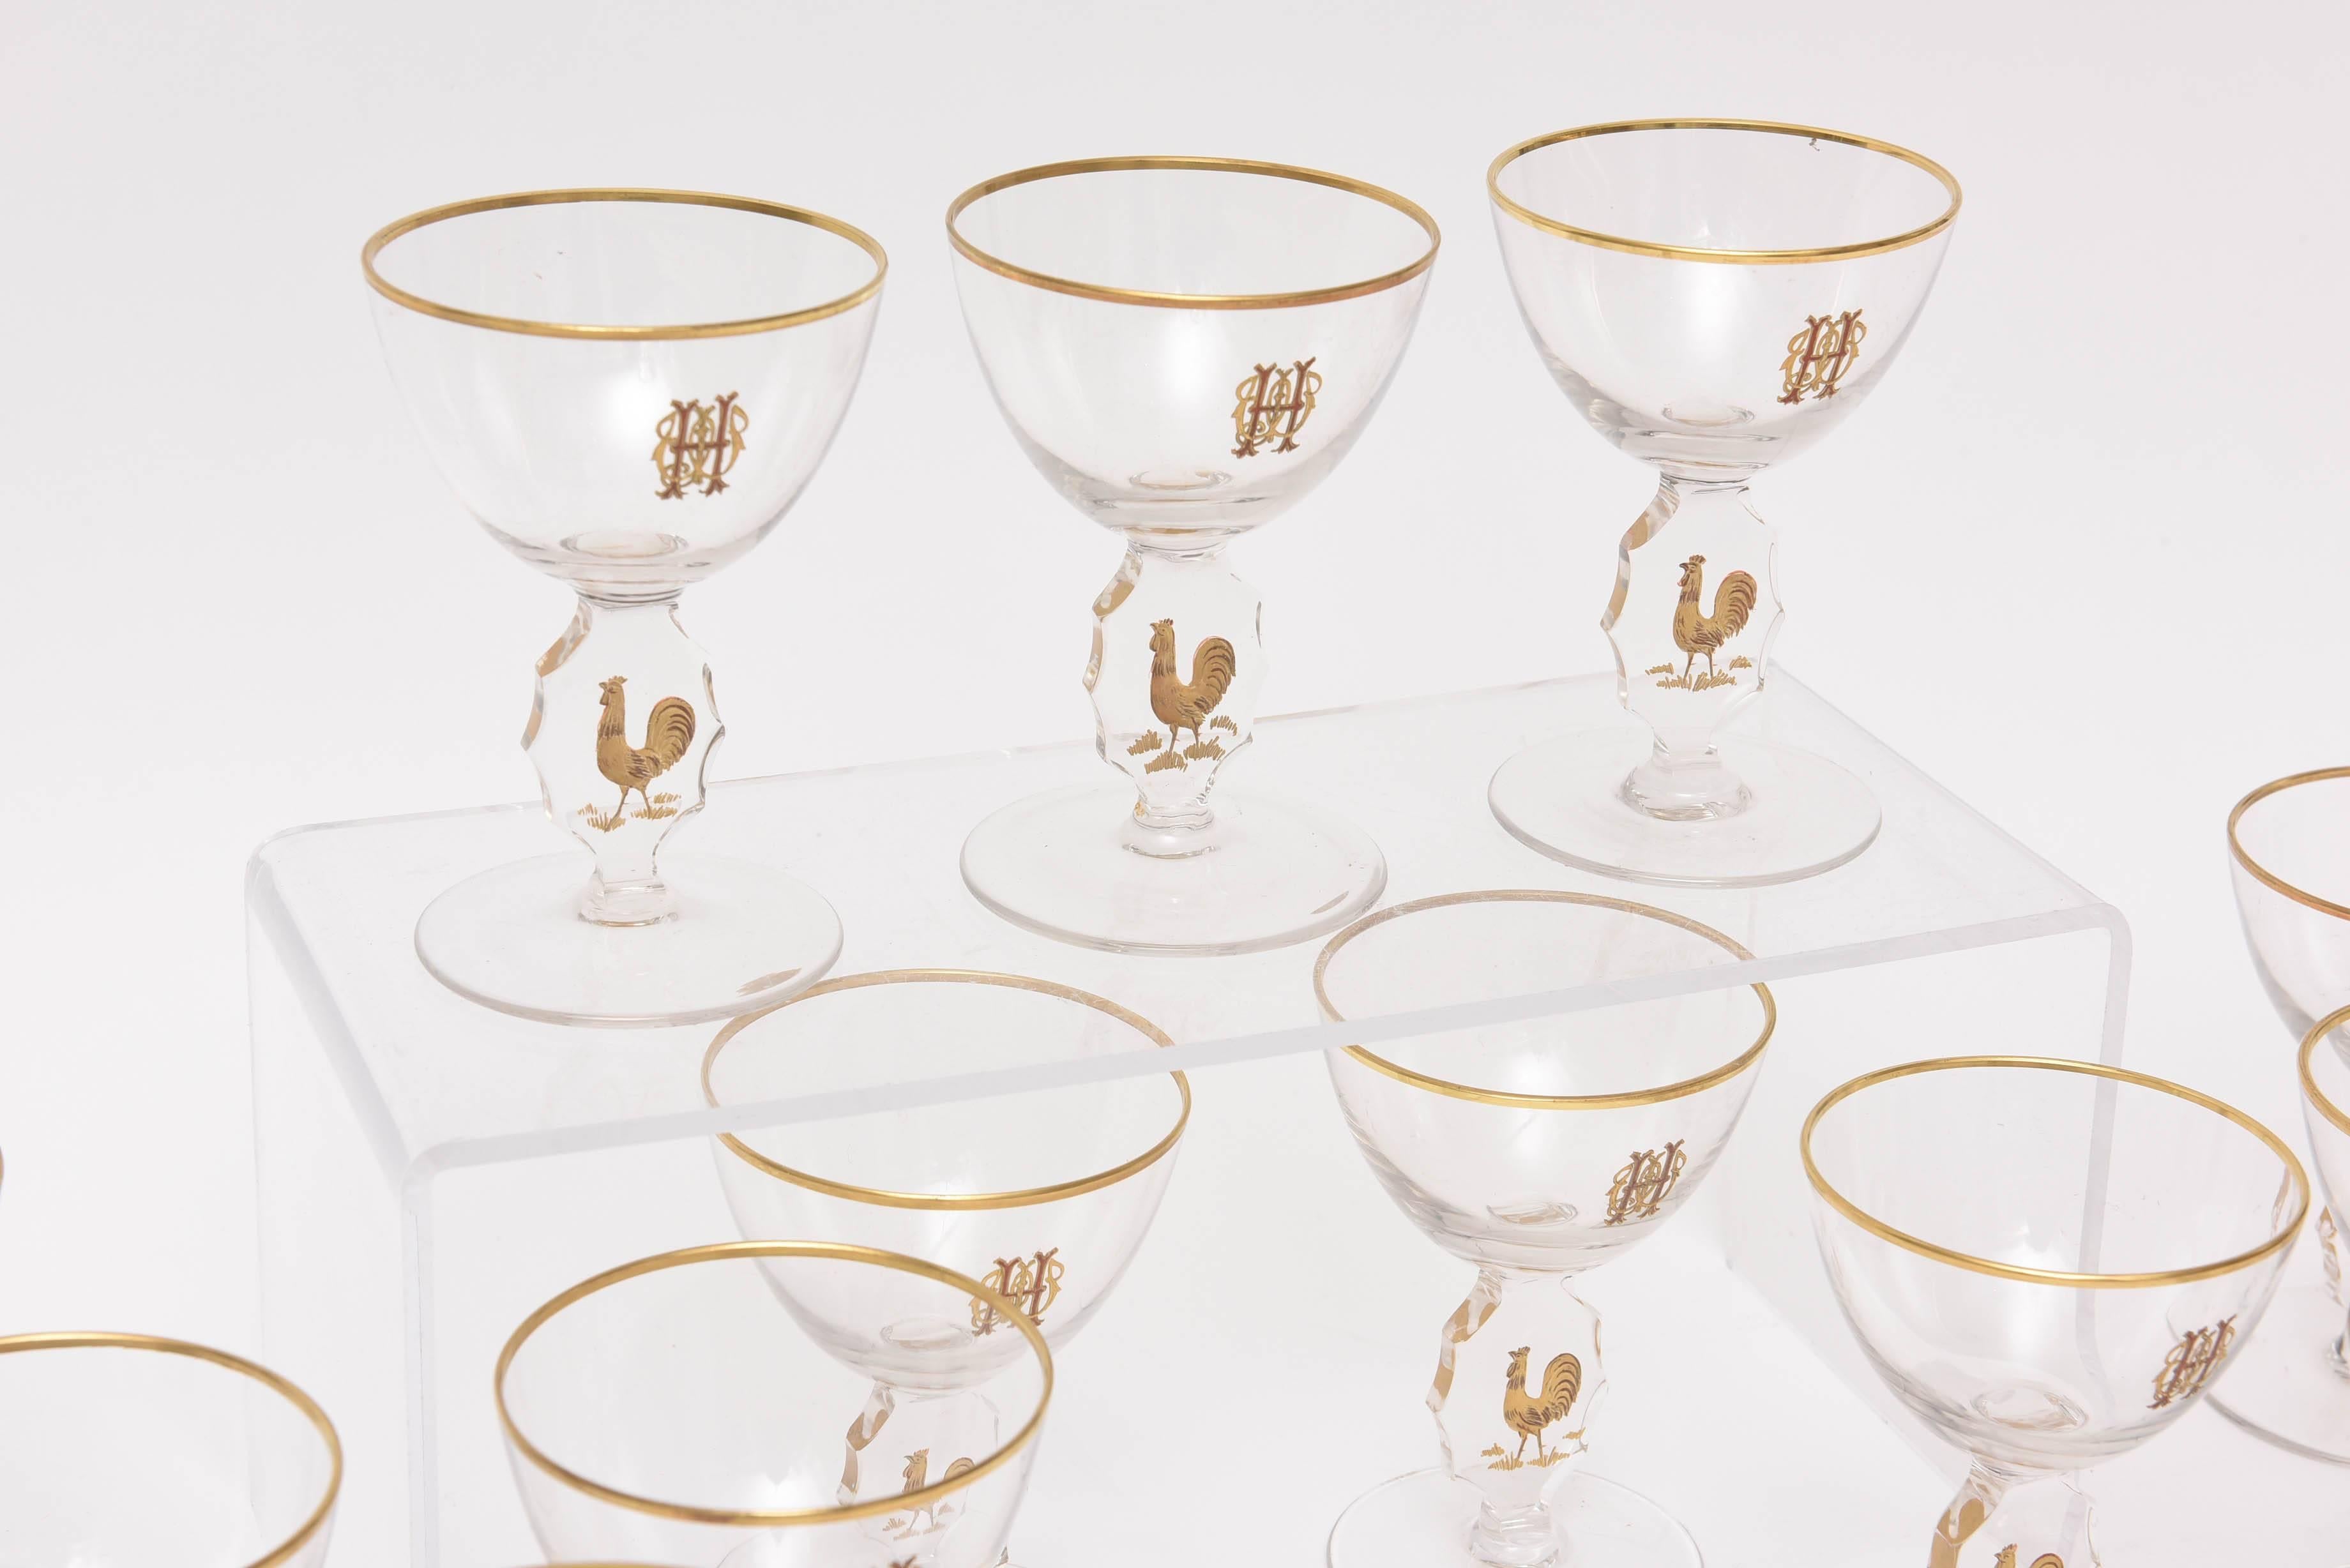 A whimsical yet elegant set of barware featuring 24-karat gold trim and elaborate monogramming. A cut and hand gilt rooster is featured on its unique cut stem. Attributed to one of the better French factories of Baccarat or Saint Louis. Ready to mix